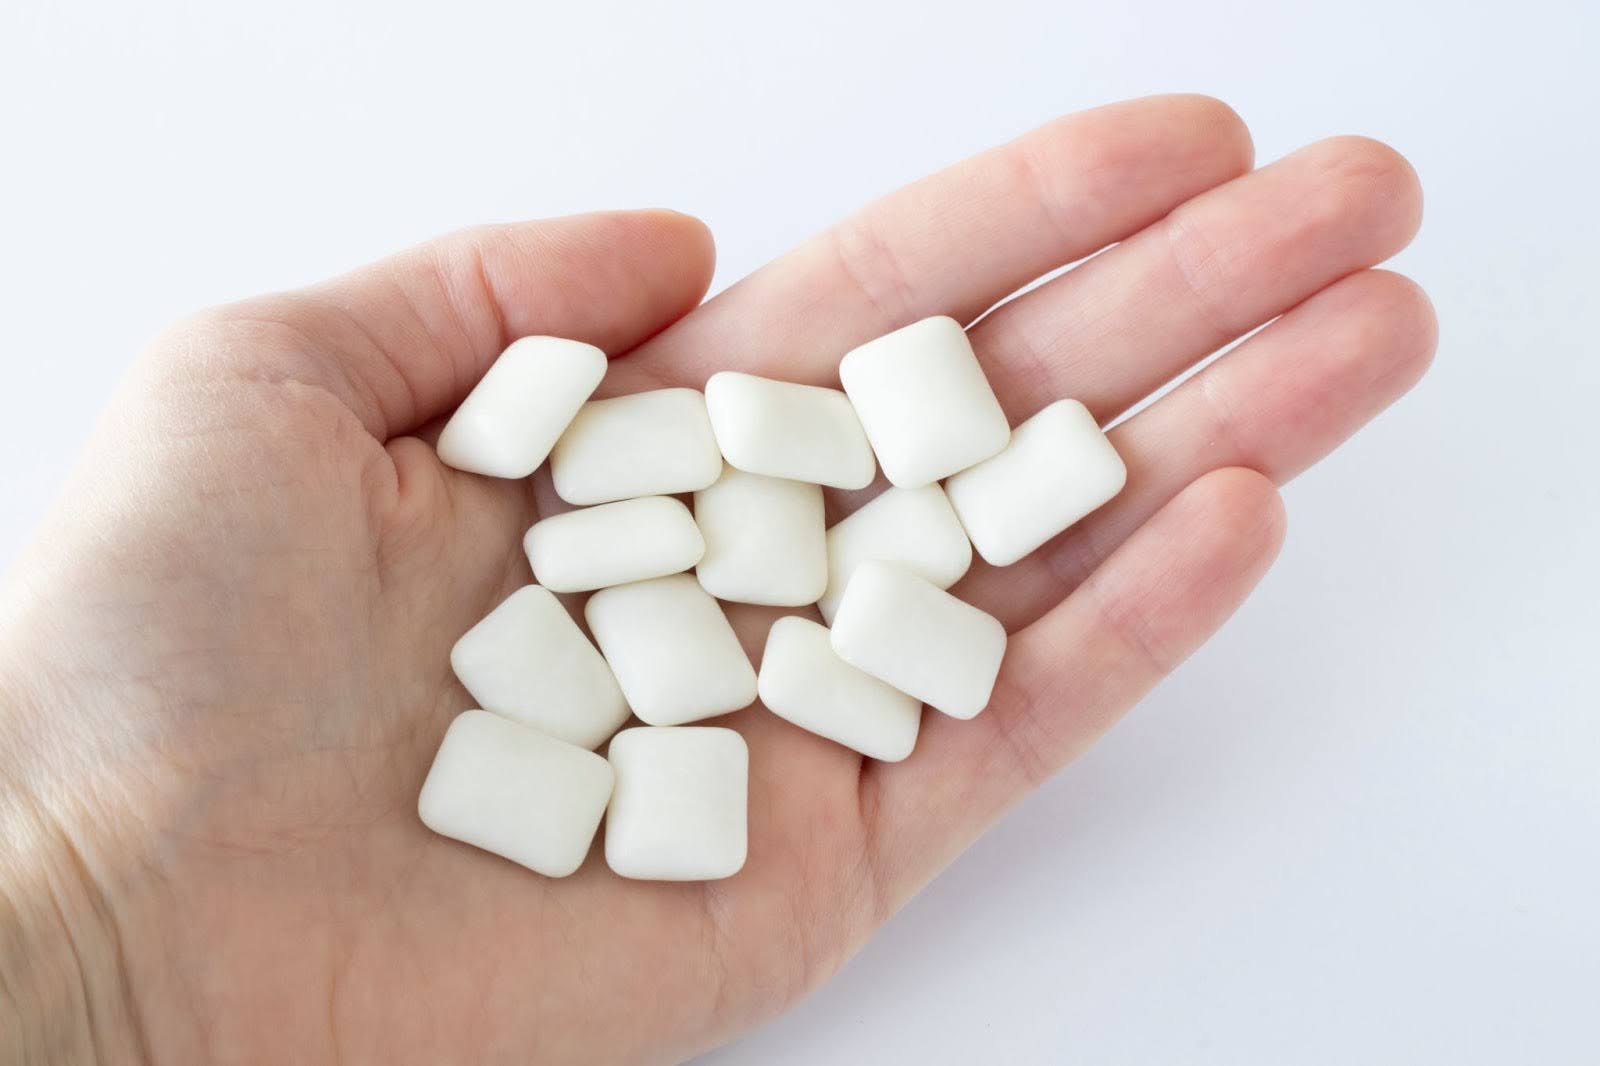 The best chewing gum for teeth - Xylitol gum